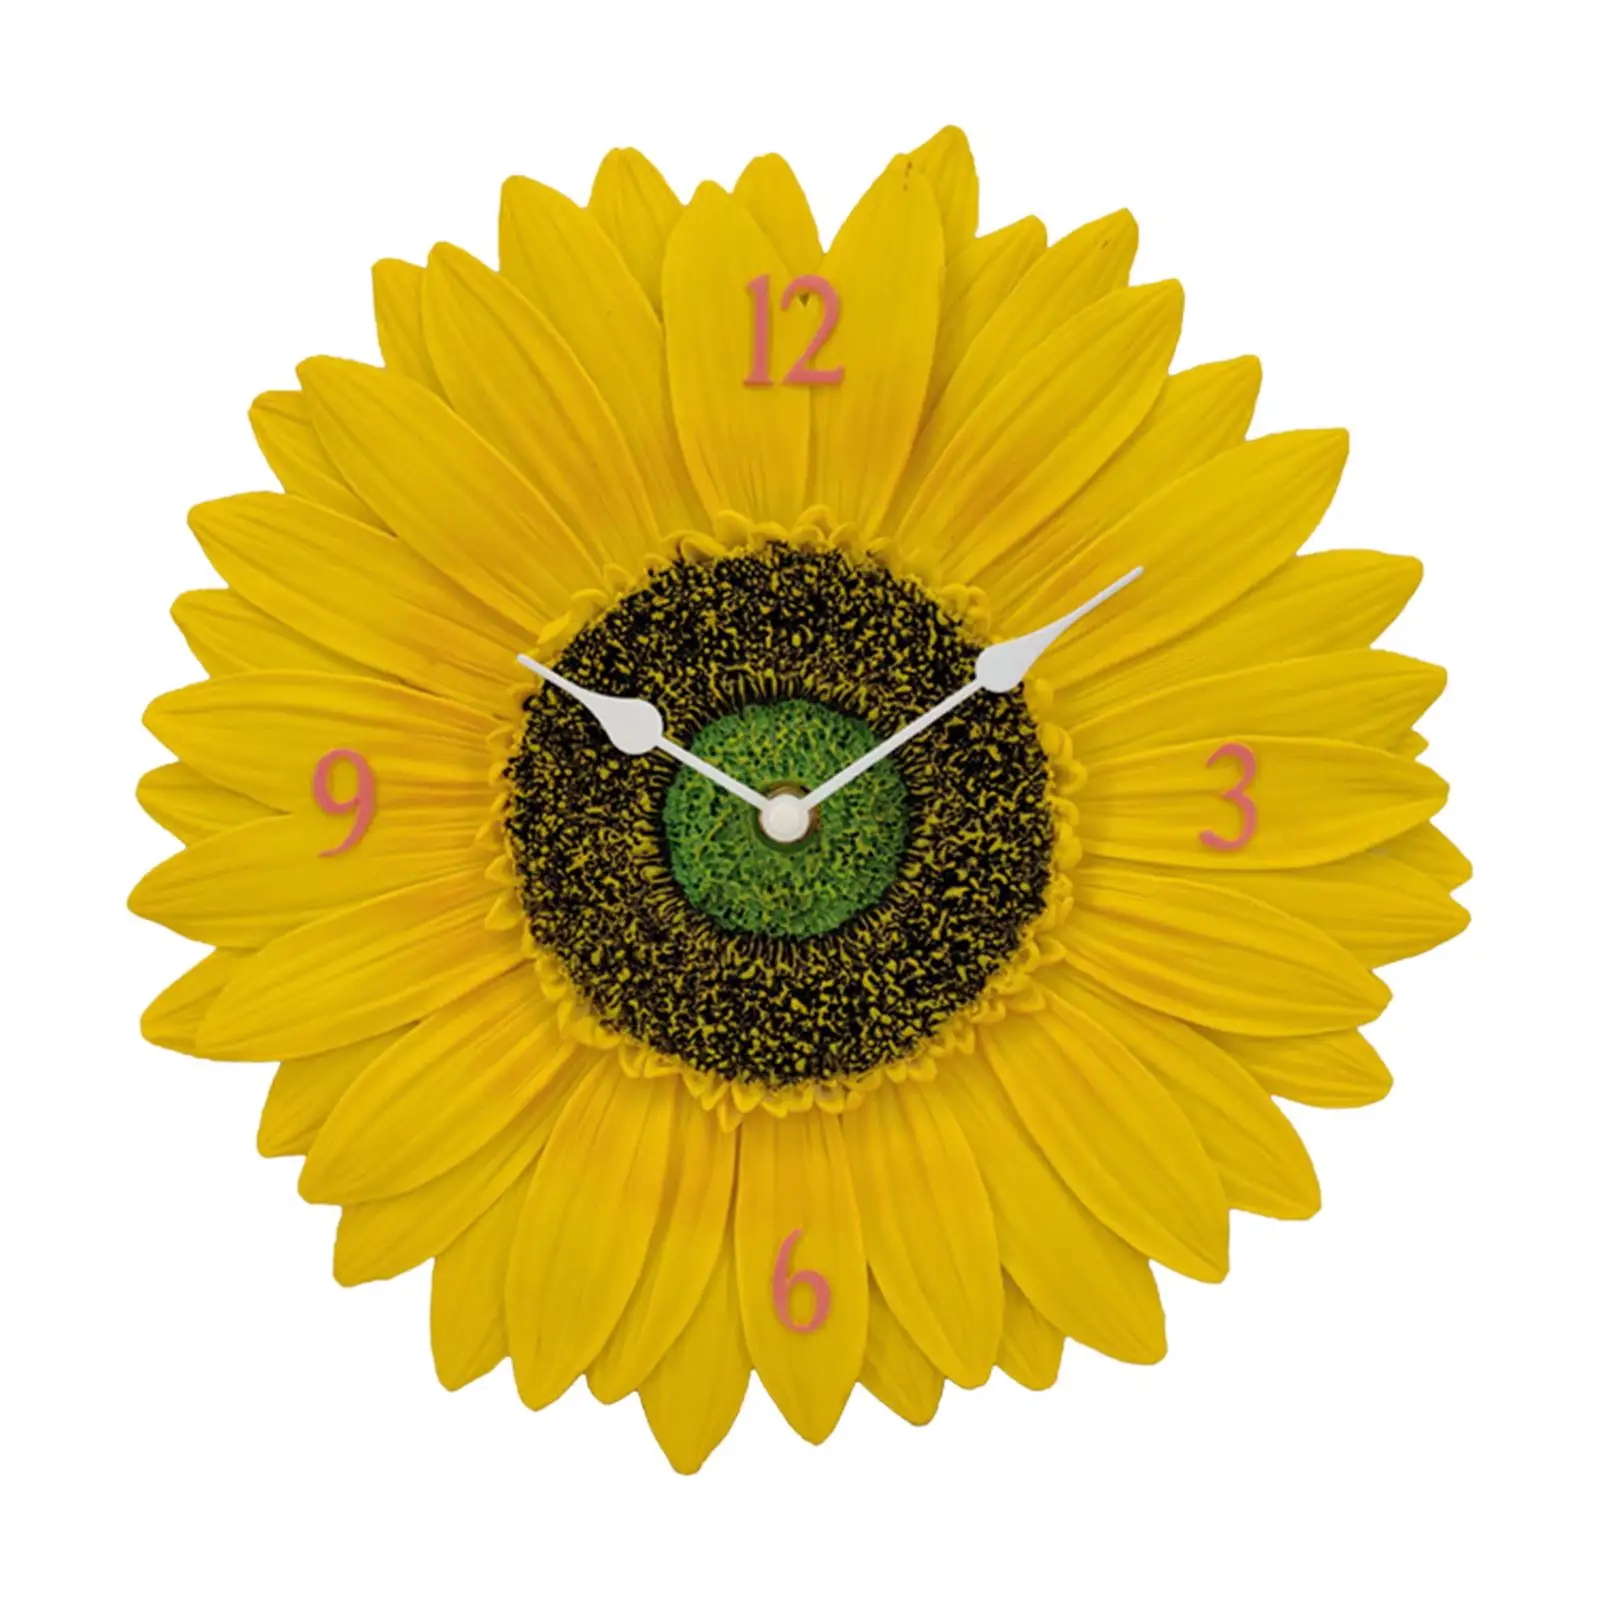 Sunflower Wall Clock Non Ticking Silent Waterproof Wall Clock Decorative Large Indoor Outdoor Wall Clock for Bathroom Farmhouse